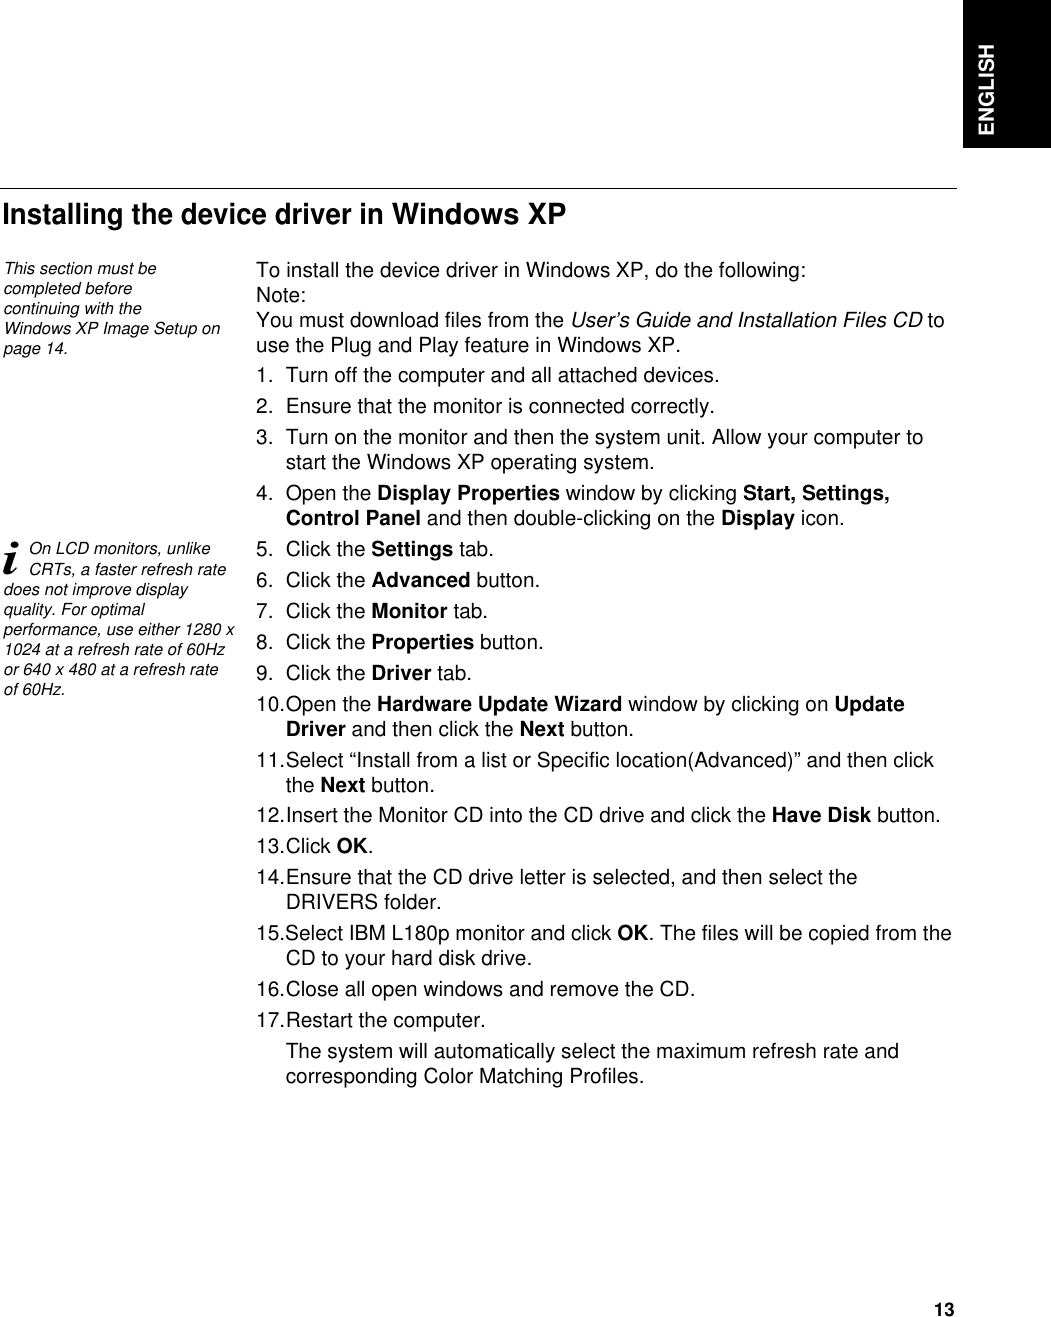 ENGLISH13To install the device driver in Windows XP, do the following: Note:You must download files from the User’s Guide and Installation Files CD touse the Plug and Play feature in Windows XP.1. Turn off the computer and all attached devices.2. Ensure that the monitor is connected correctly.3. Turn on the monitor and then the system unit. Allow your computer tostart the Windows XP operating system.4. Open the Display Properties window by clicking Start, Settings,Control Panel and then double-clicking on the Display icon.5. Click the Settings tab.6. Click the Advanced button.7. Click the Monitor tab.8. Click the Properties button.9. Click the Driver tab.10.Open the Hardware Update Wizard window by clicking on UpdateDriver and then click the Next button.11.Select “Install from a list or Specific location(Advanced)” and then clickthe Next button.12.Insert the Monitor CD into the CD drive and click the Have Disk button.13.Click OK.14.Ensure that the CD drive letter is selected, and then select theDRIVERS folder.15.Select IBM L180p monitor and click OK. The files will be copied from theCD to your hard disk drive.16.Close all open windows and remove the CD.17.Restart the computer.The system will automatically select the maximum refresh rate andcorresponding Color Matching Profiles.Installing the device driver in Windows XP This section must becompleted before continuing with the Windows XP Image Setup onpage 14.iOn LCD monitors, unlikeCRTs, a faster refresh ratedoes not improve displayquality. For optimalperformance, use either 1280 x1024 at a refresh rate of 60Hzor 640 x 480 at a refresh rateof 60Hz.